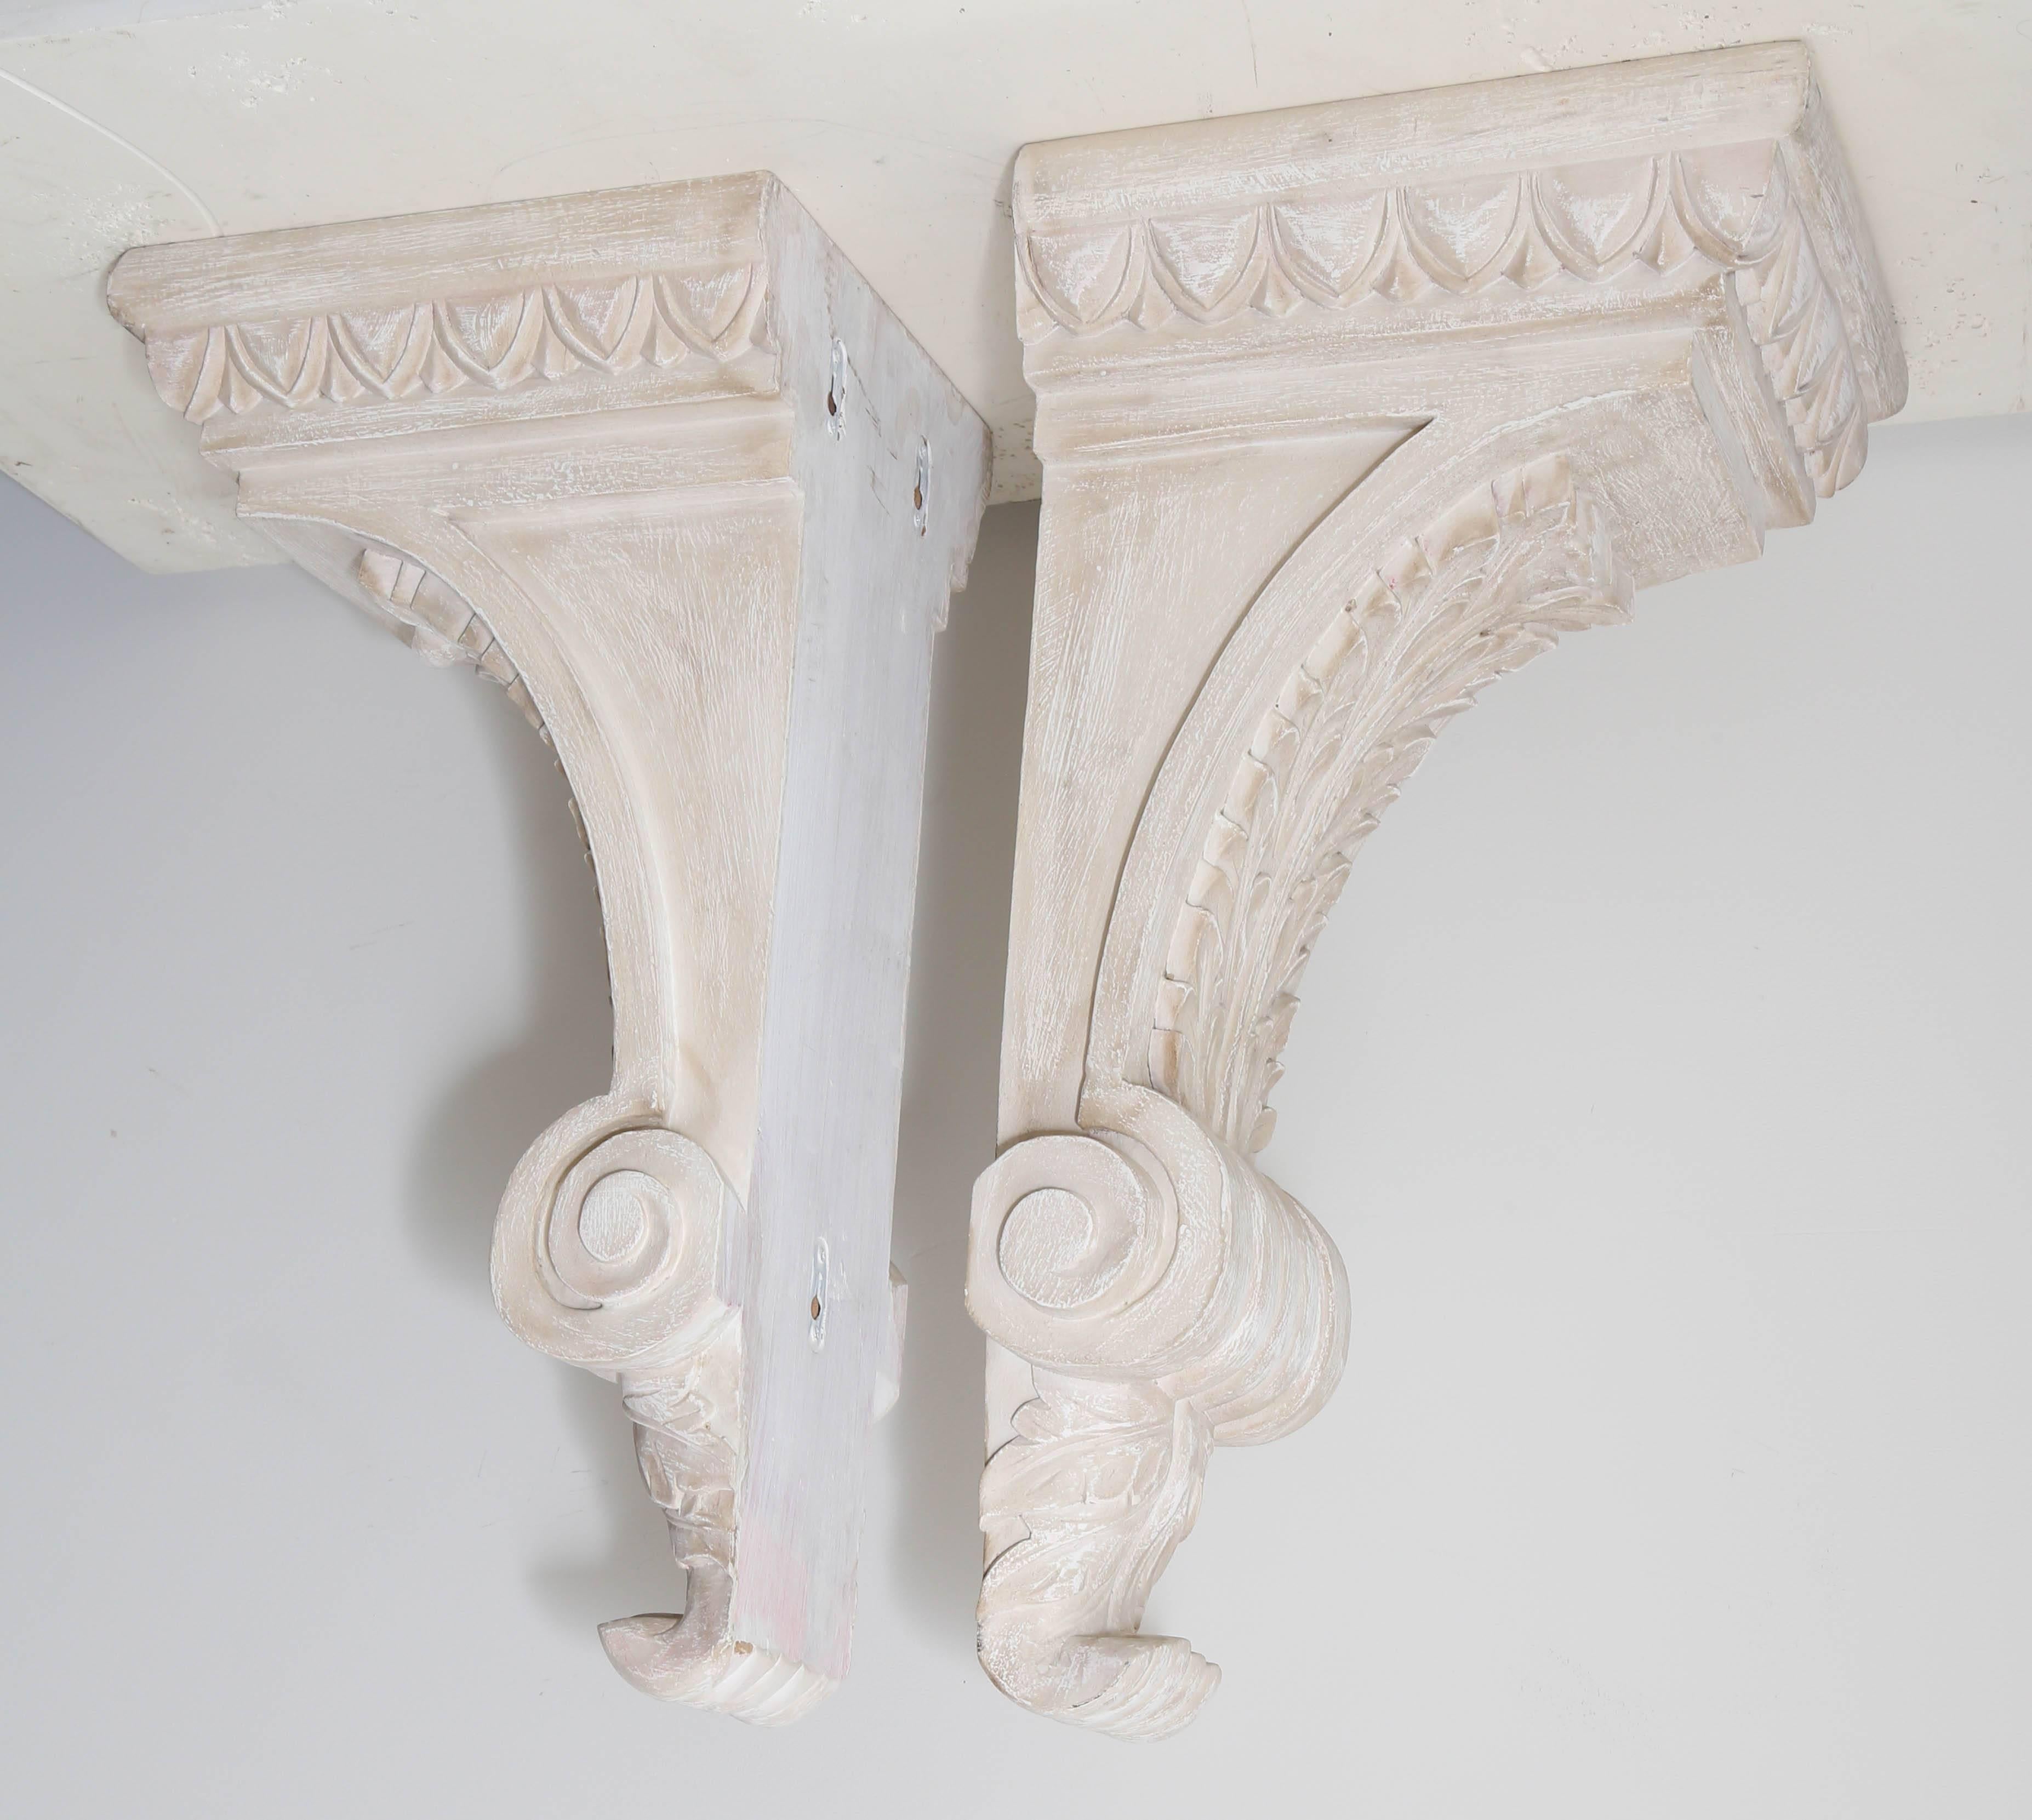 Pair of carved wood architectural wall brackets.